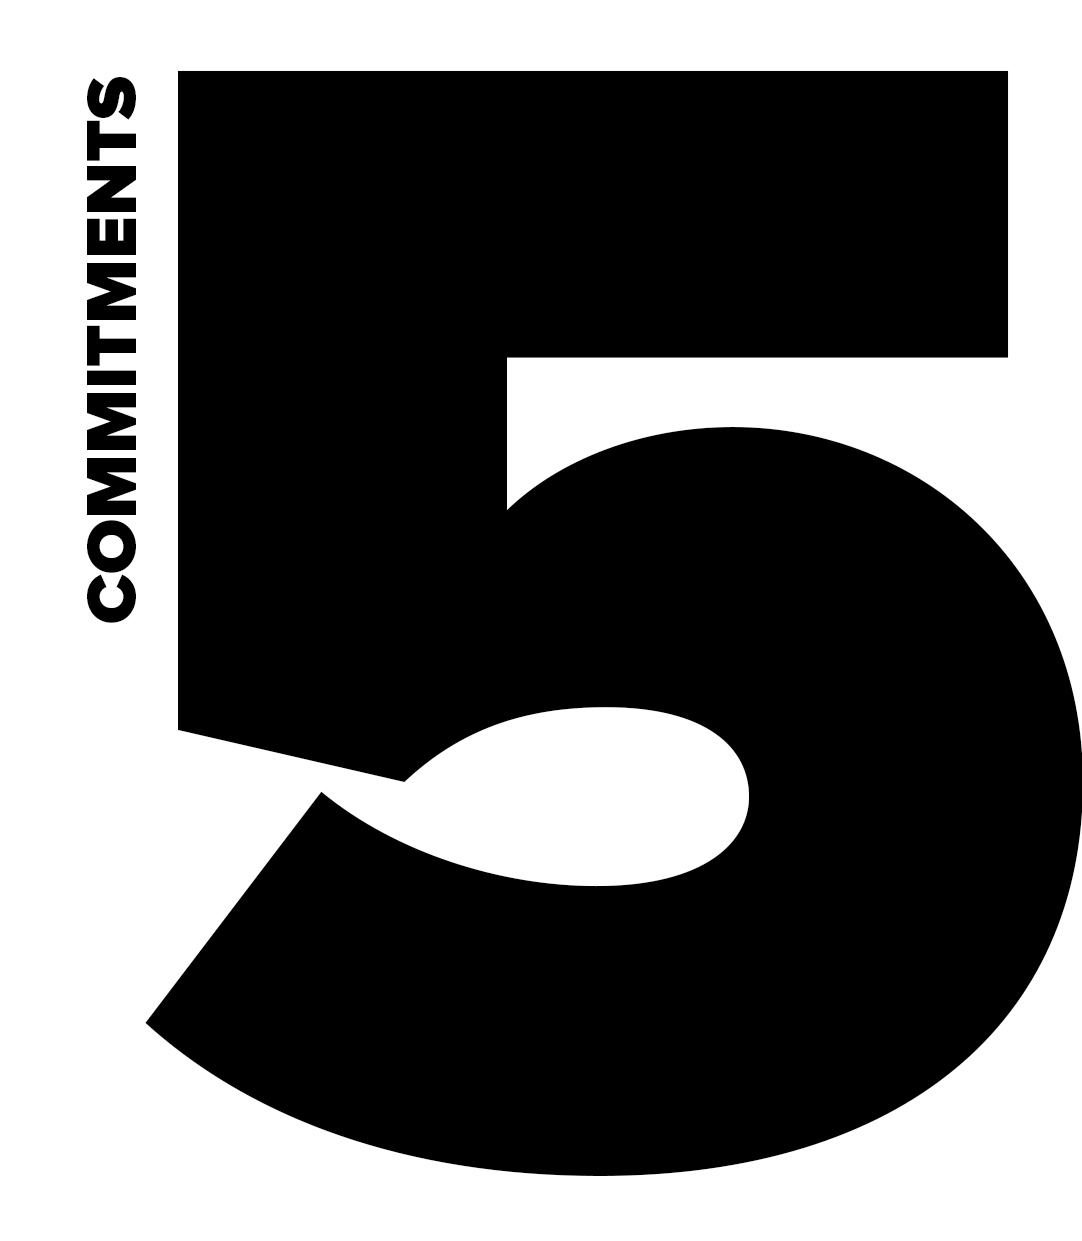 Our 5 Commitments